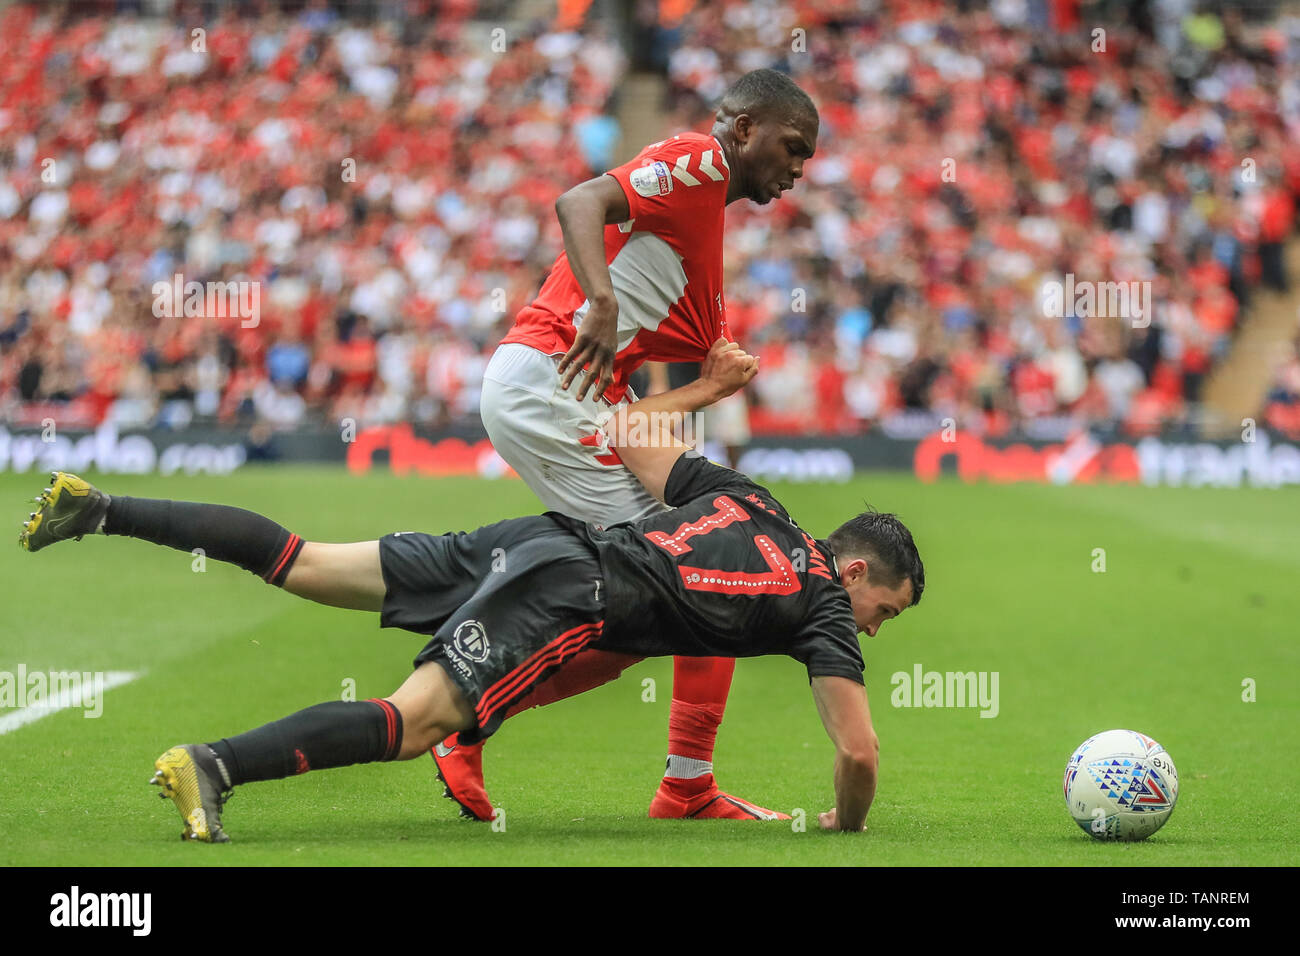 26th May 2019 , Wembley Stadium, London, England ; Sky Bet League 1 Playoff Final , Charlton Athletic vs Sunderland ; Anfernee Dijksteel (02) of Charlton holds off Lewis Morgan (17) of Sunderland    Credit: Mark Cosgrove/News Images    English Football League images are subject to DataCo Licence Stock Photo